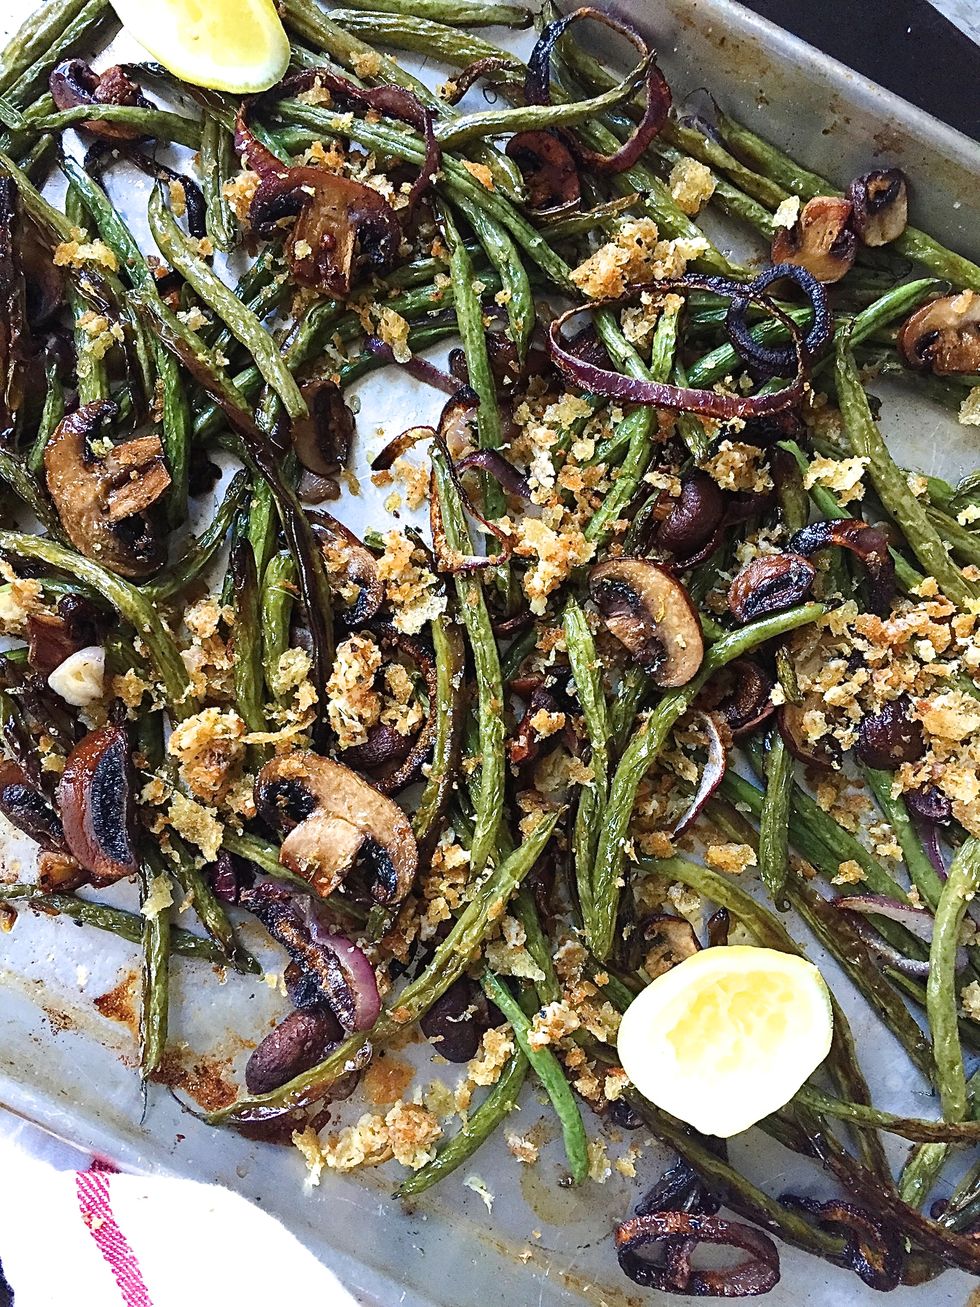 Roasted Green Beans, Mushroom, and Onions with Parmesan Breadcrumbs